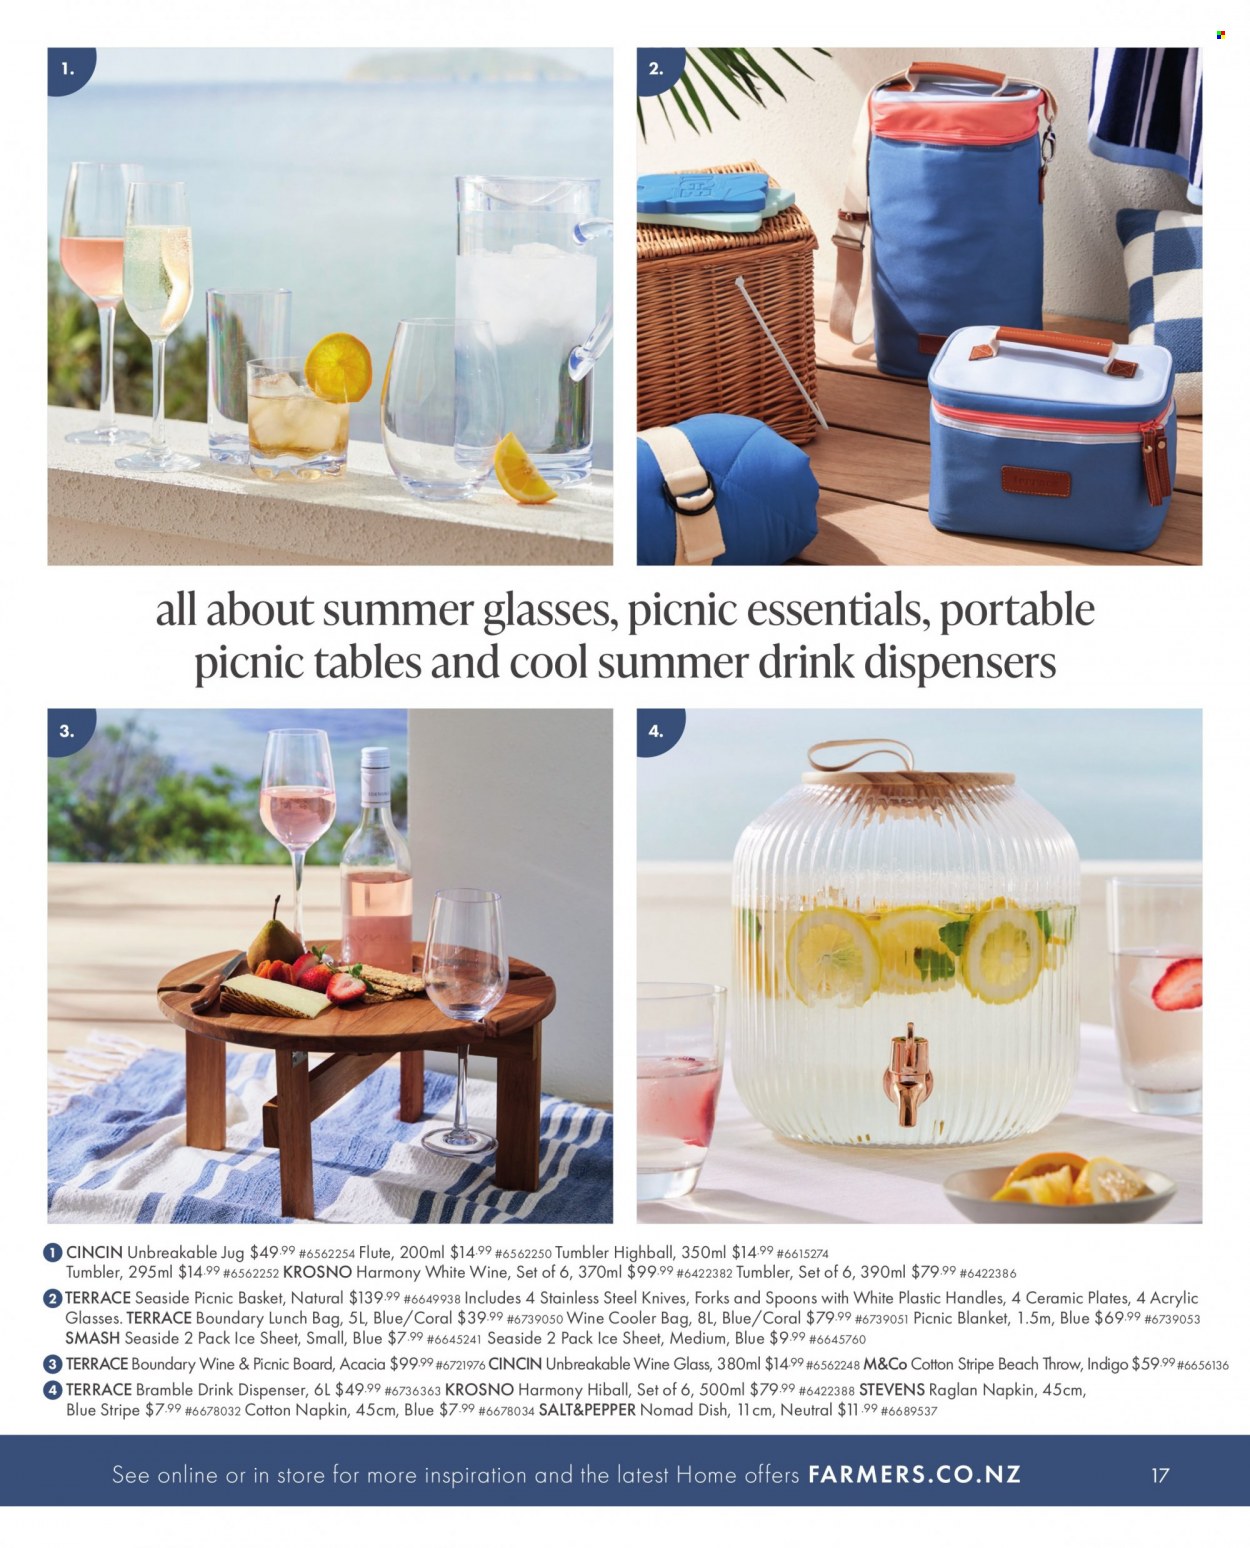 thumbnail - Farmers mailer - Sales products - basket, knife, dispenser, spoon, tumbler, wine glass, plate, cooler bag, napkins, blanket, table. Page 17.